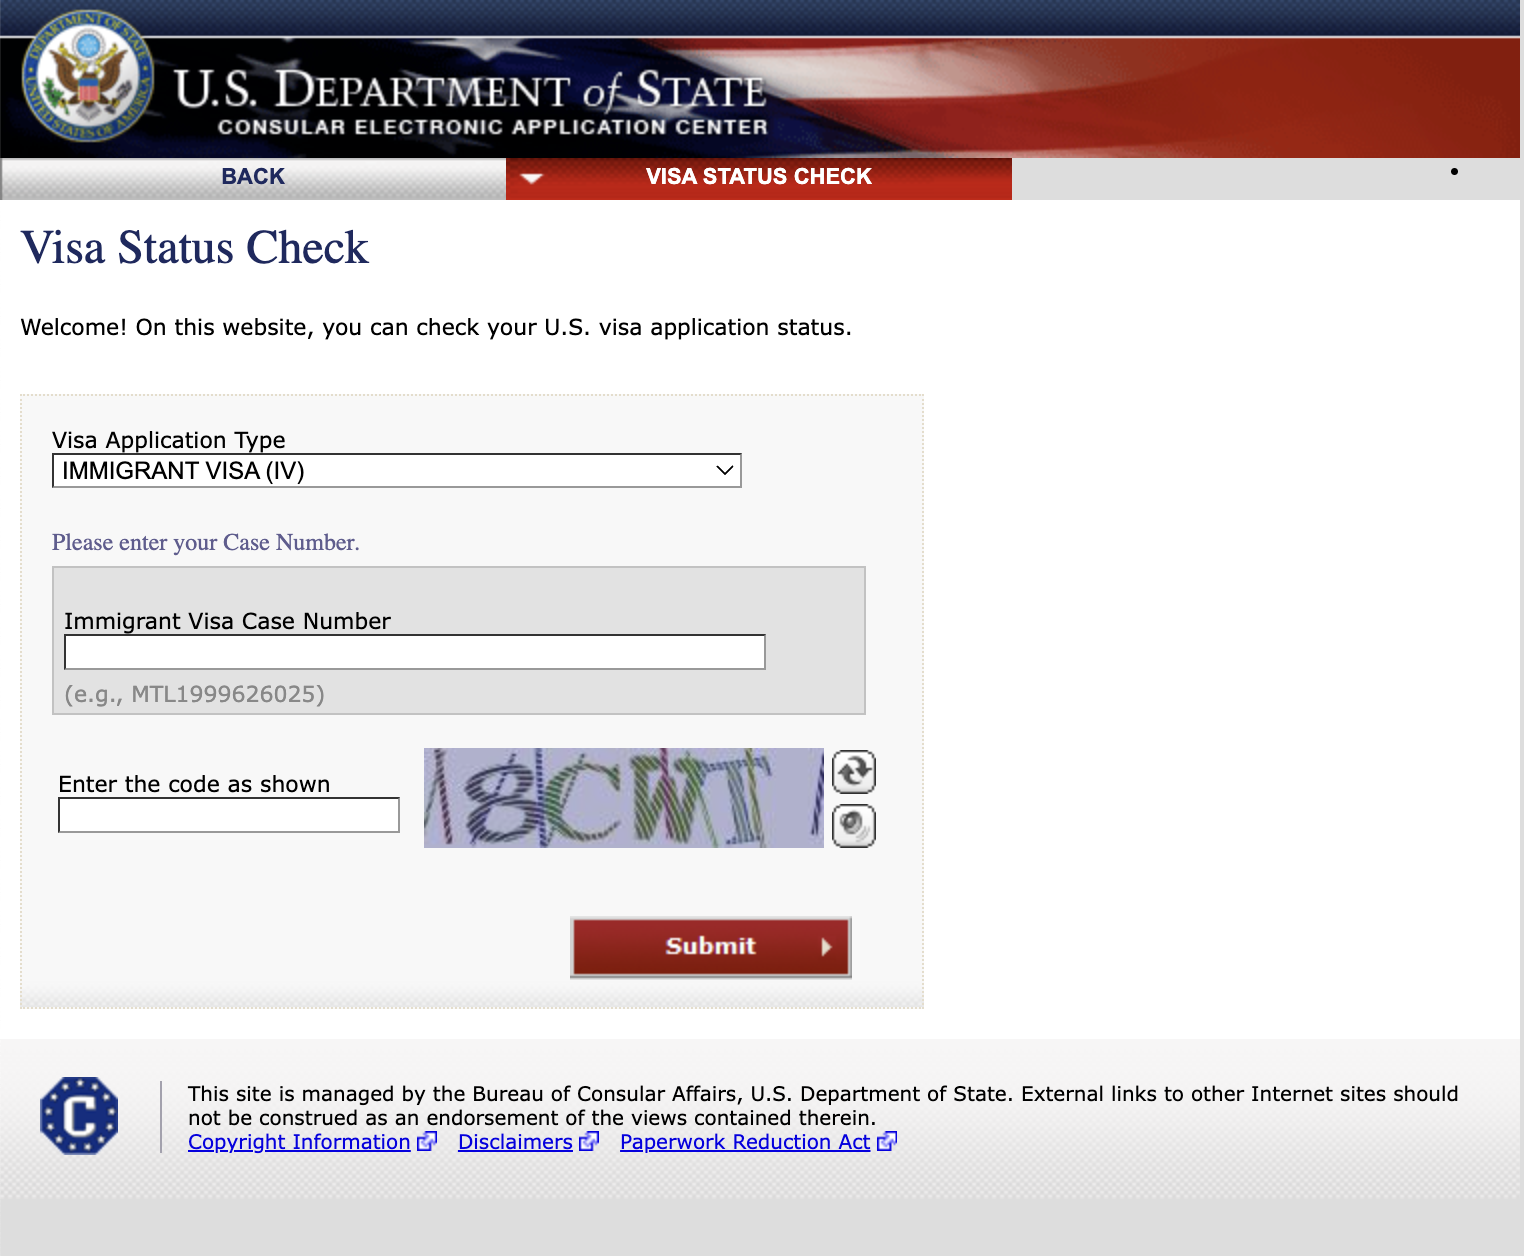 Image shows the U.S. Department of State's landing page for its visa status check tool via the Consular Electronic Application Centner.